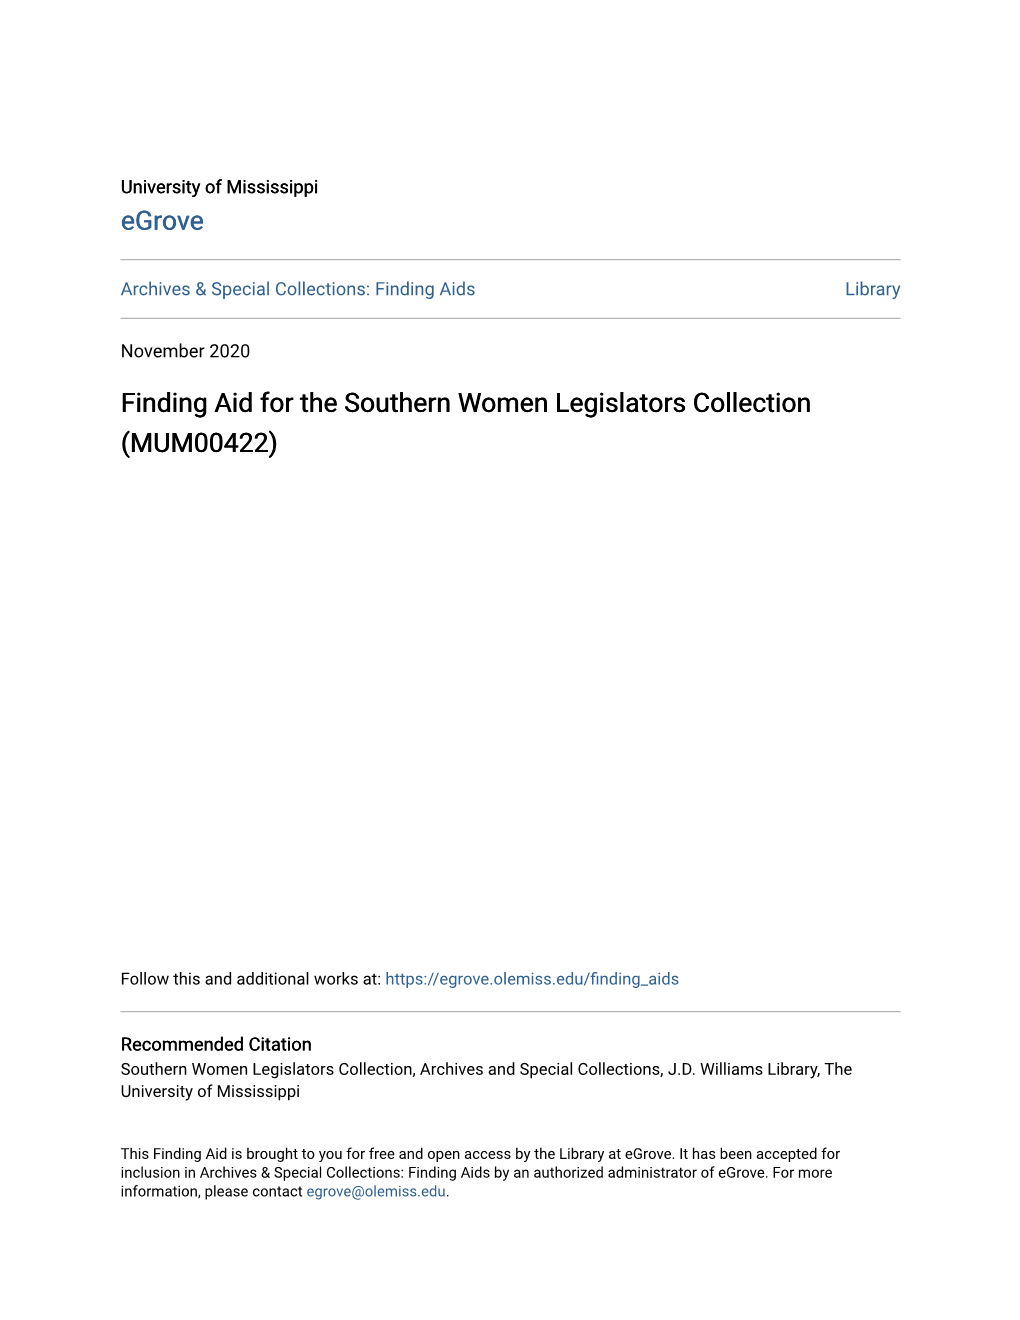 Finding Aid for the Southern Women Legislators Collection (MUM00422)